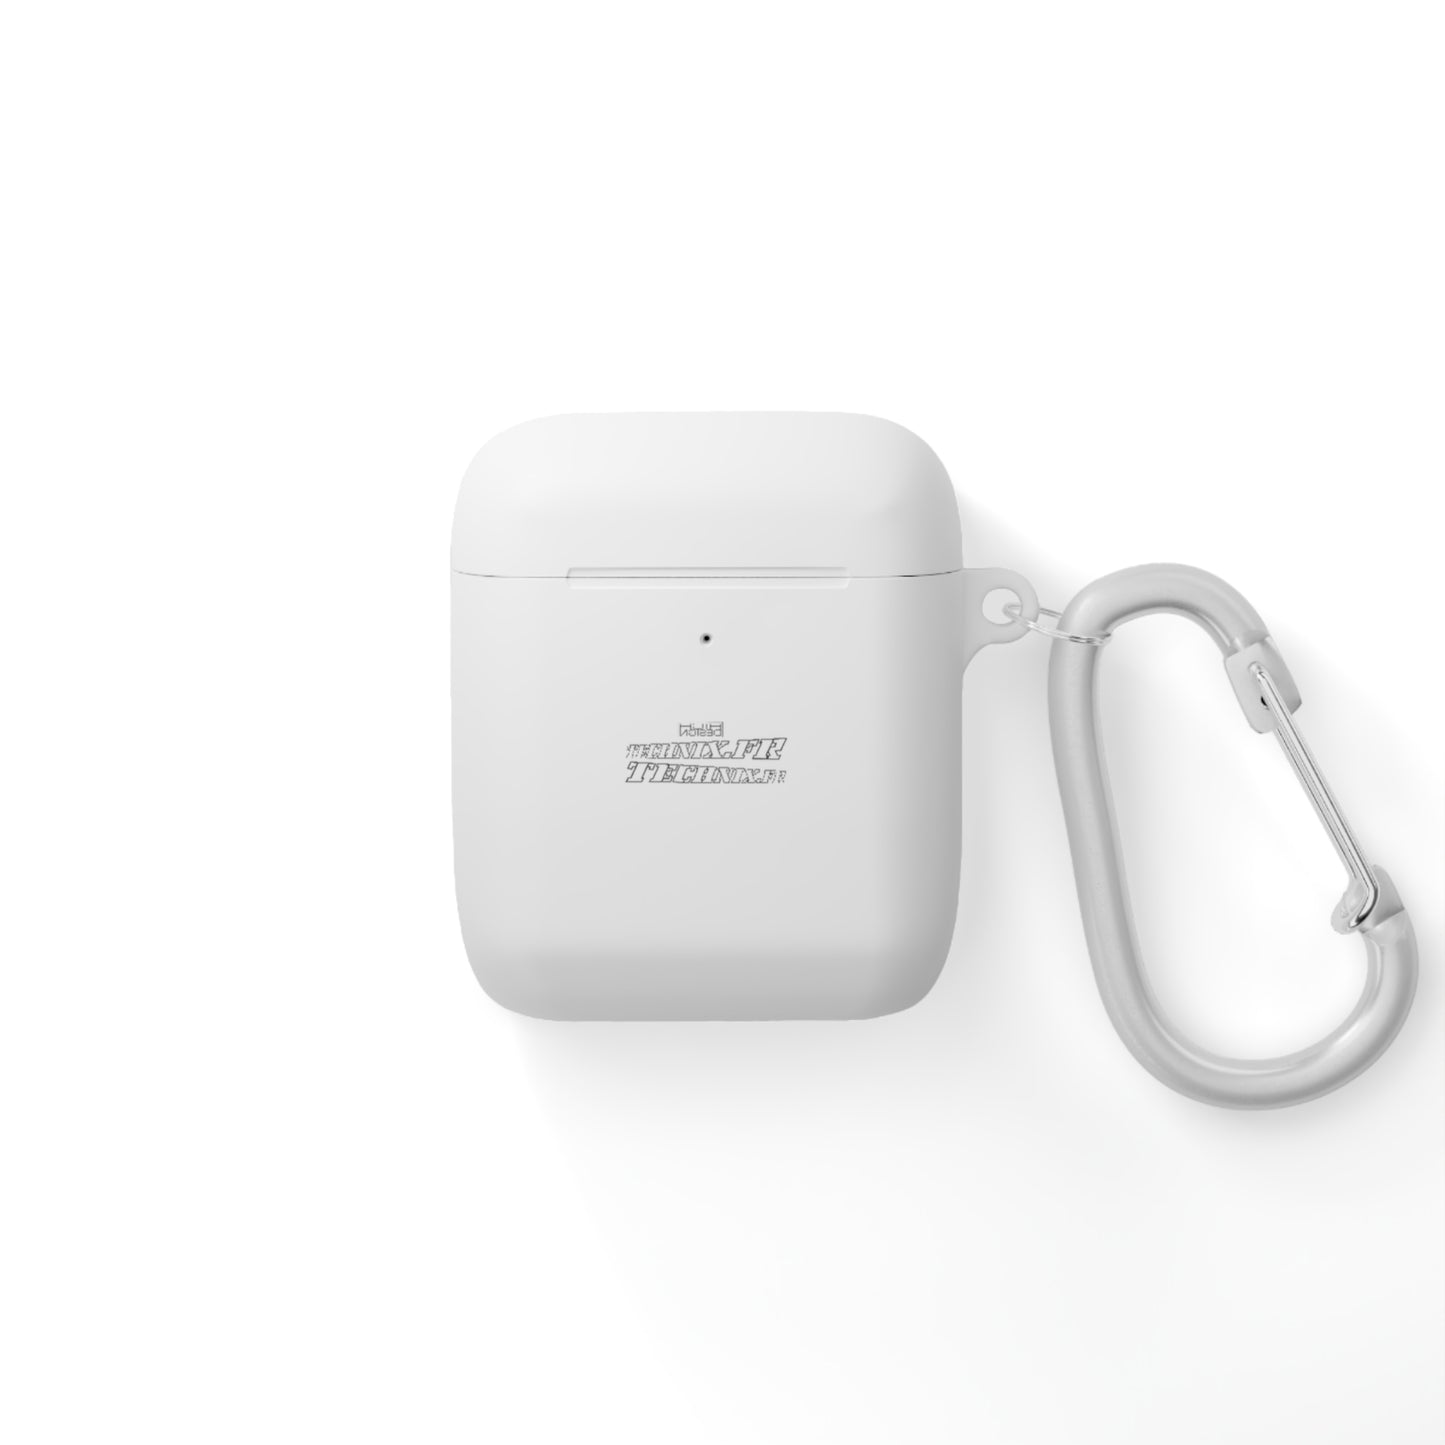 TECHNIX.FR AirPods and AirPods Pro Case Cover